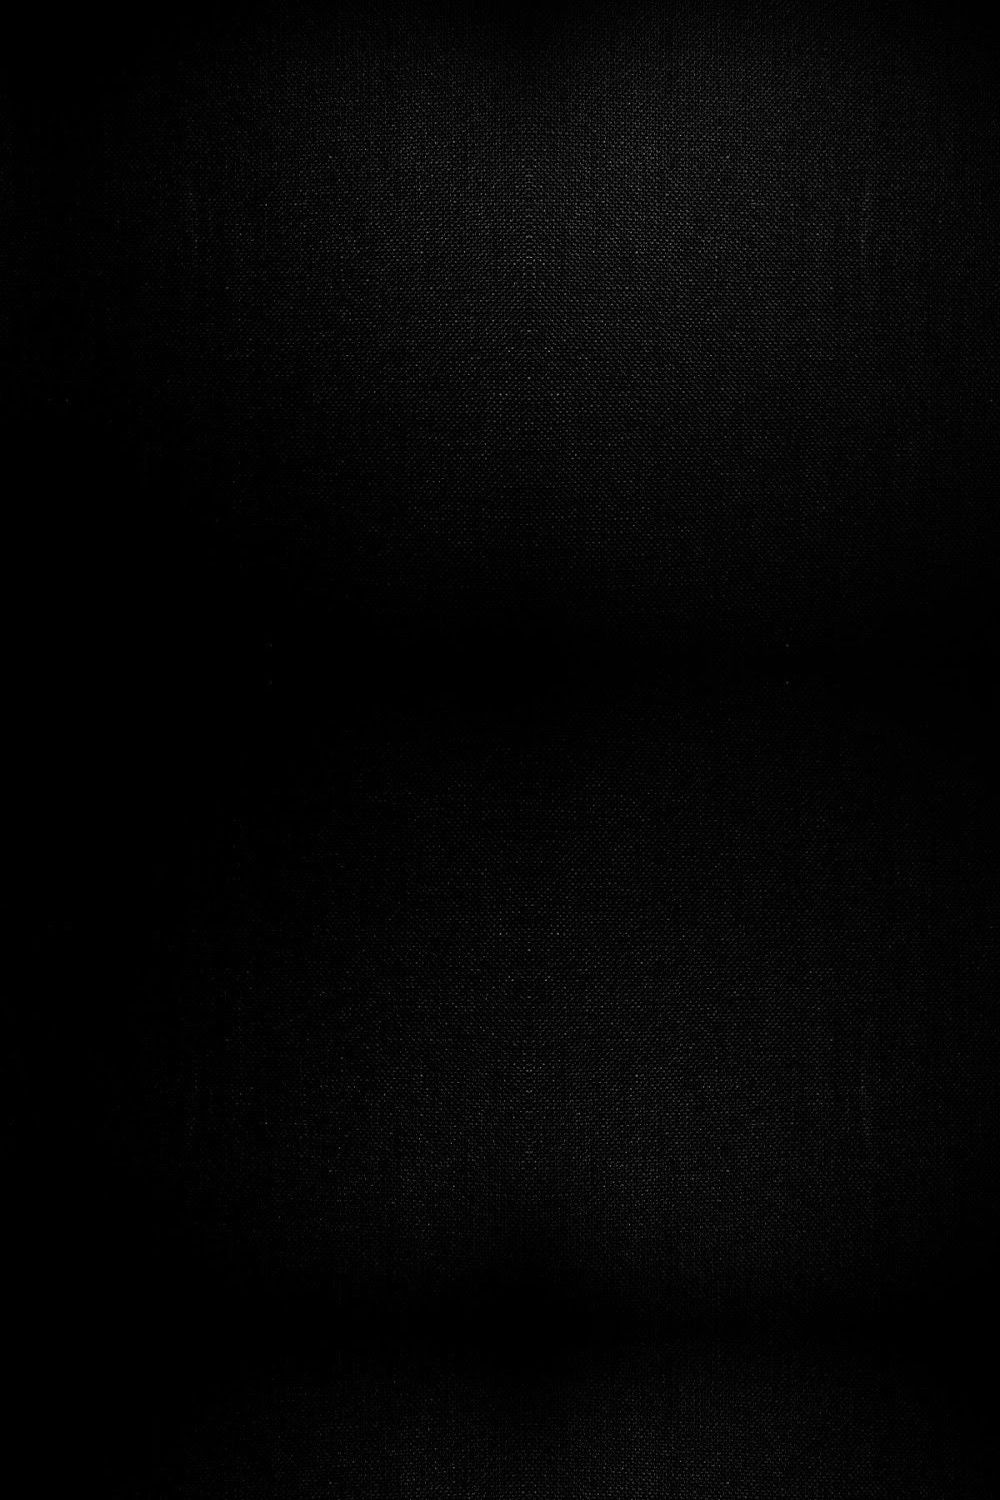 Pure Black Wallpaper Iphone - Pure black wallpaper iphone is the best ...